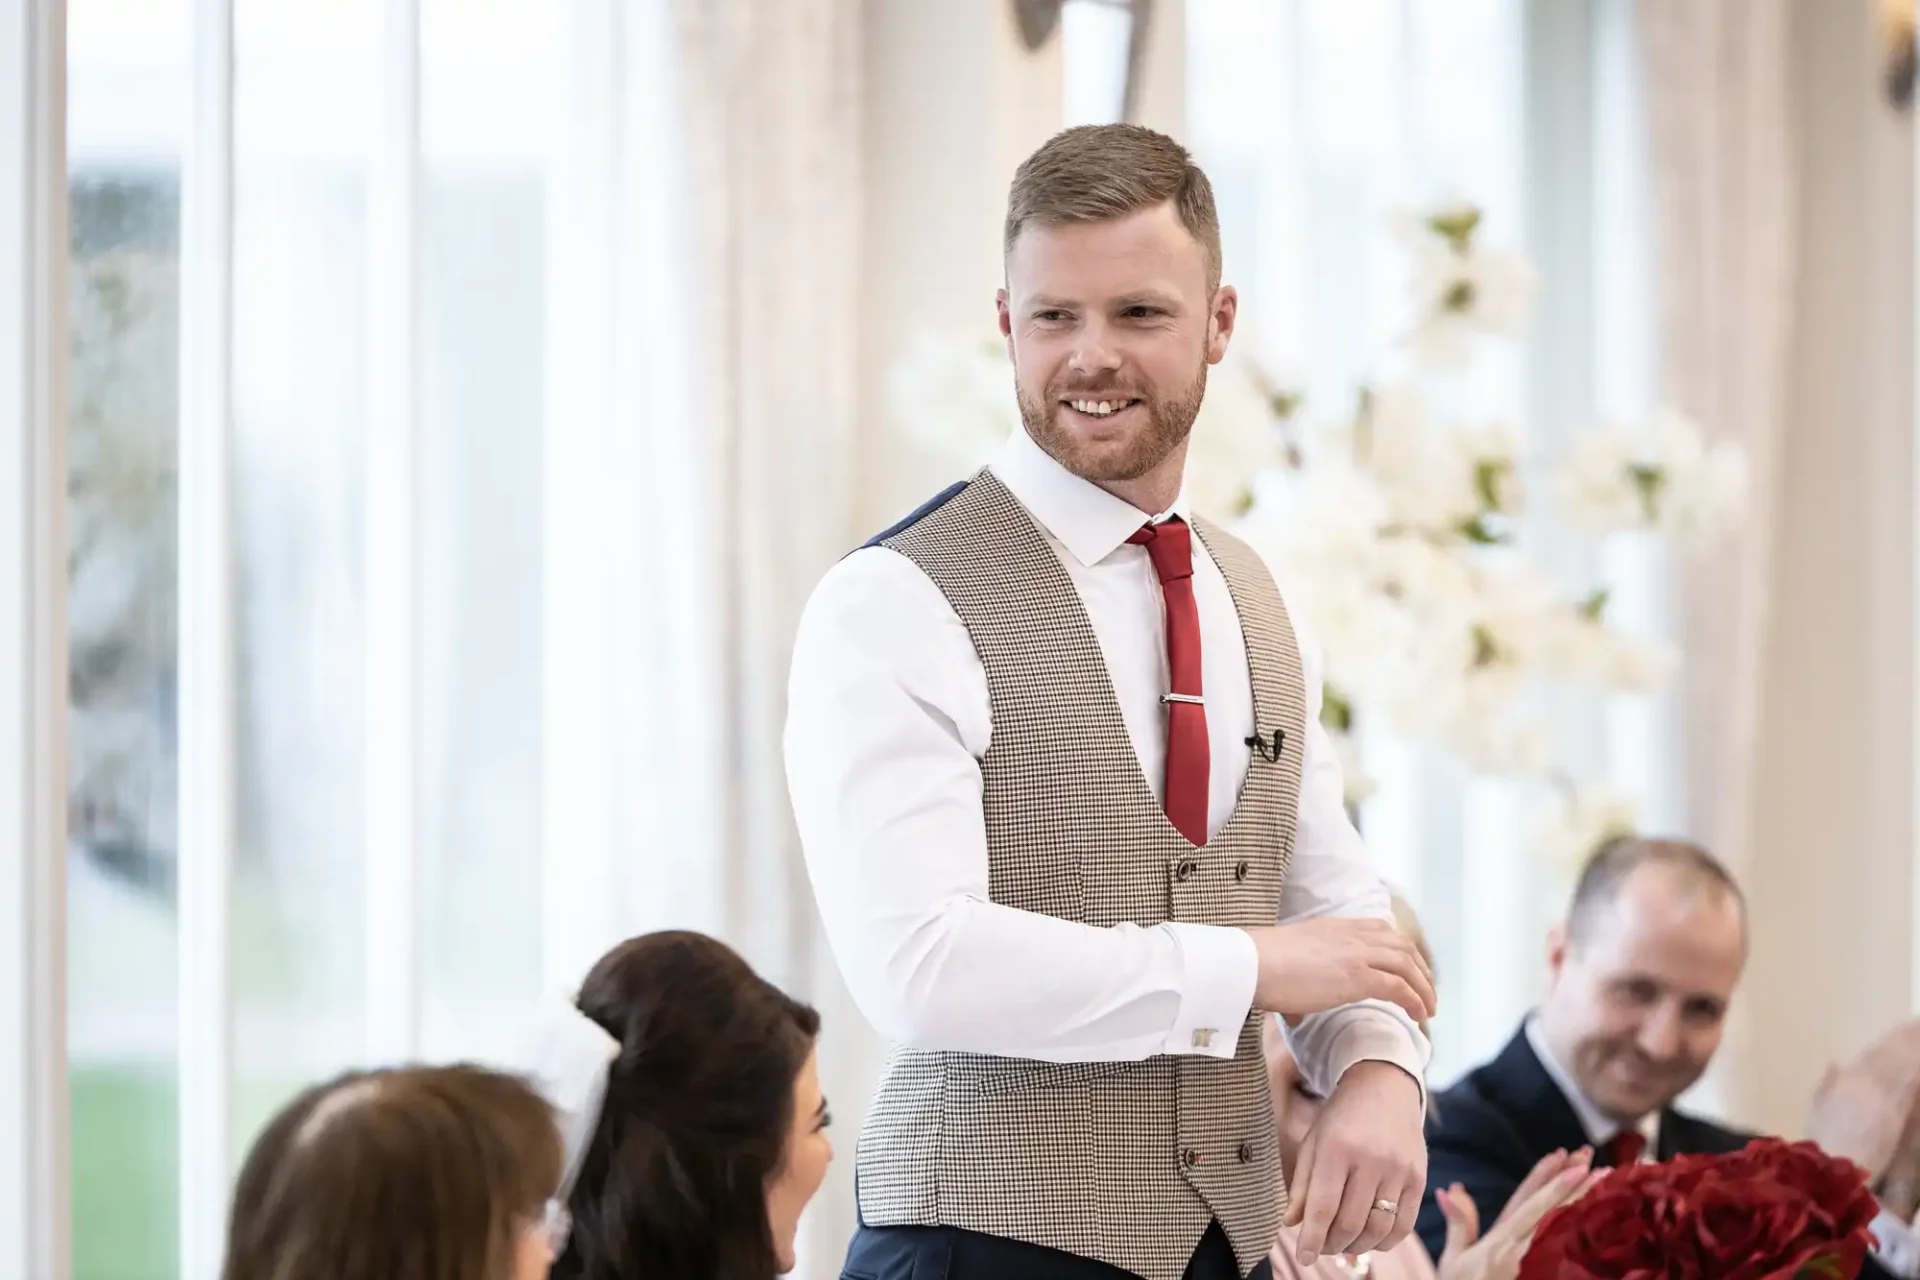 A man wearing a tweed vest and red tie smiles while standing at a formal event, with seated guests blurred in the background.